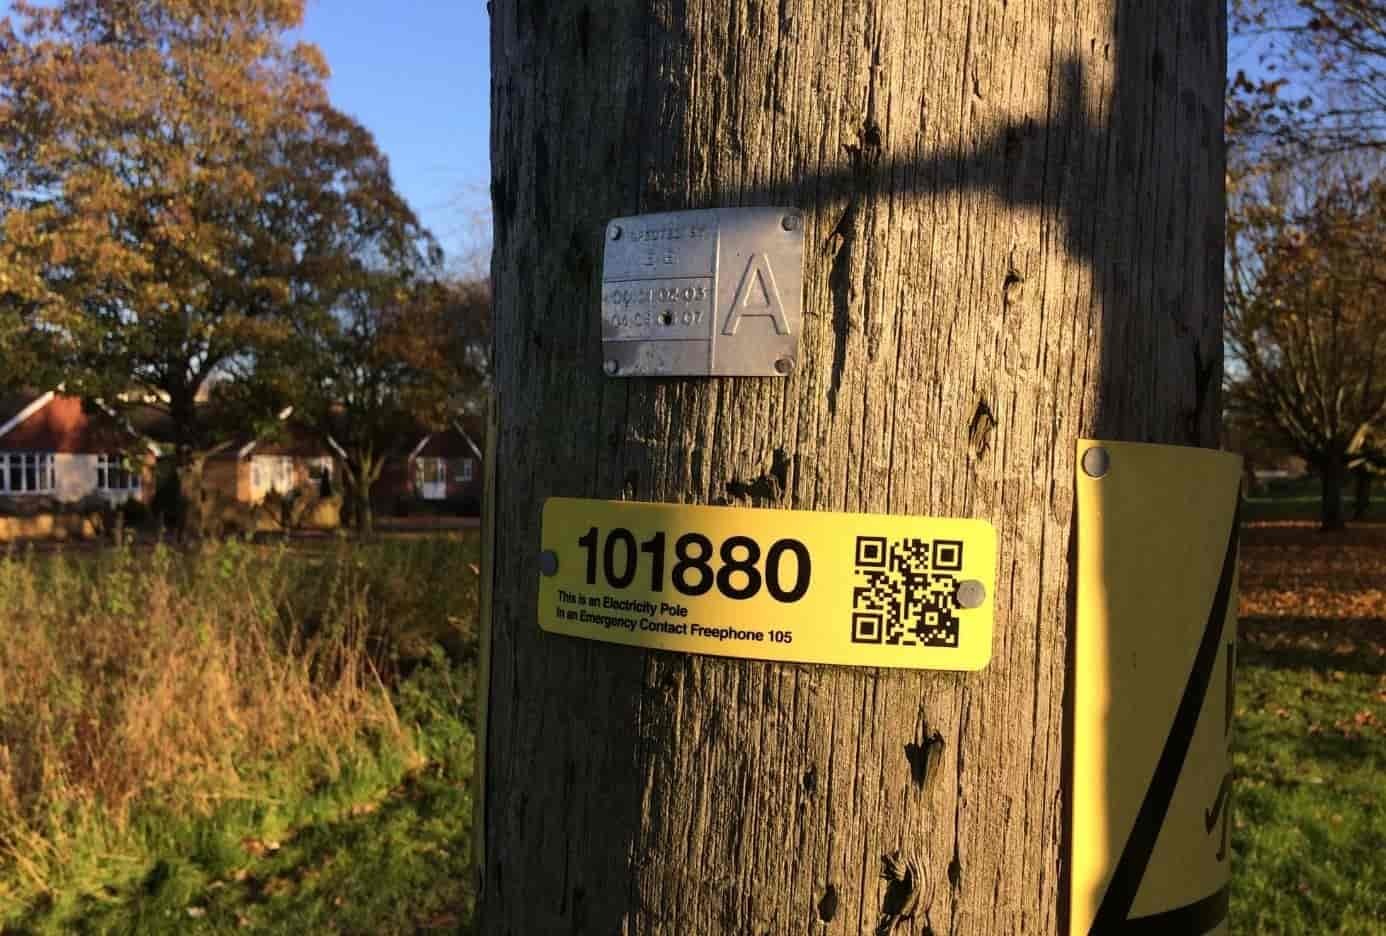 Now power poles across the East of England have a unique number and QR code to help keep people safe